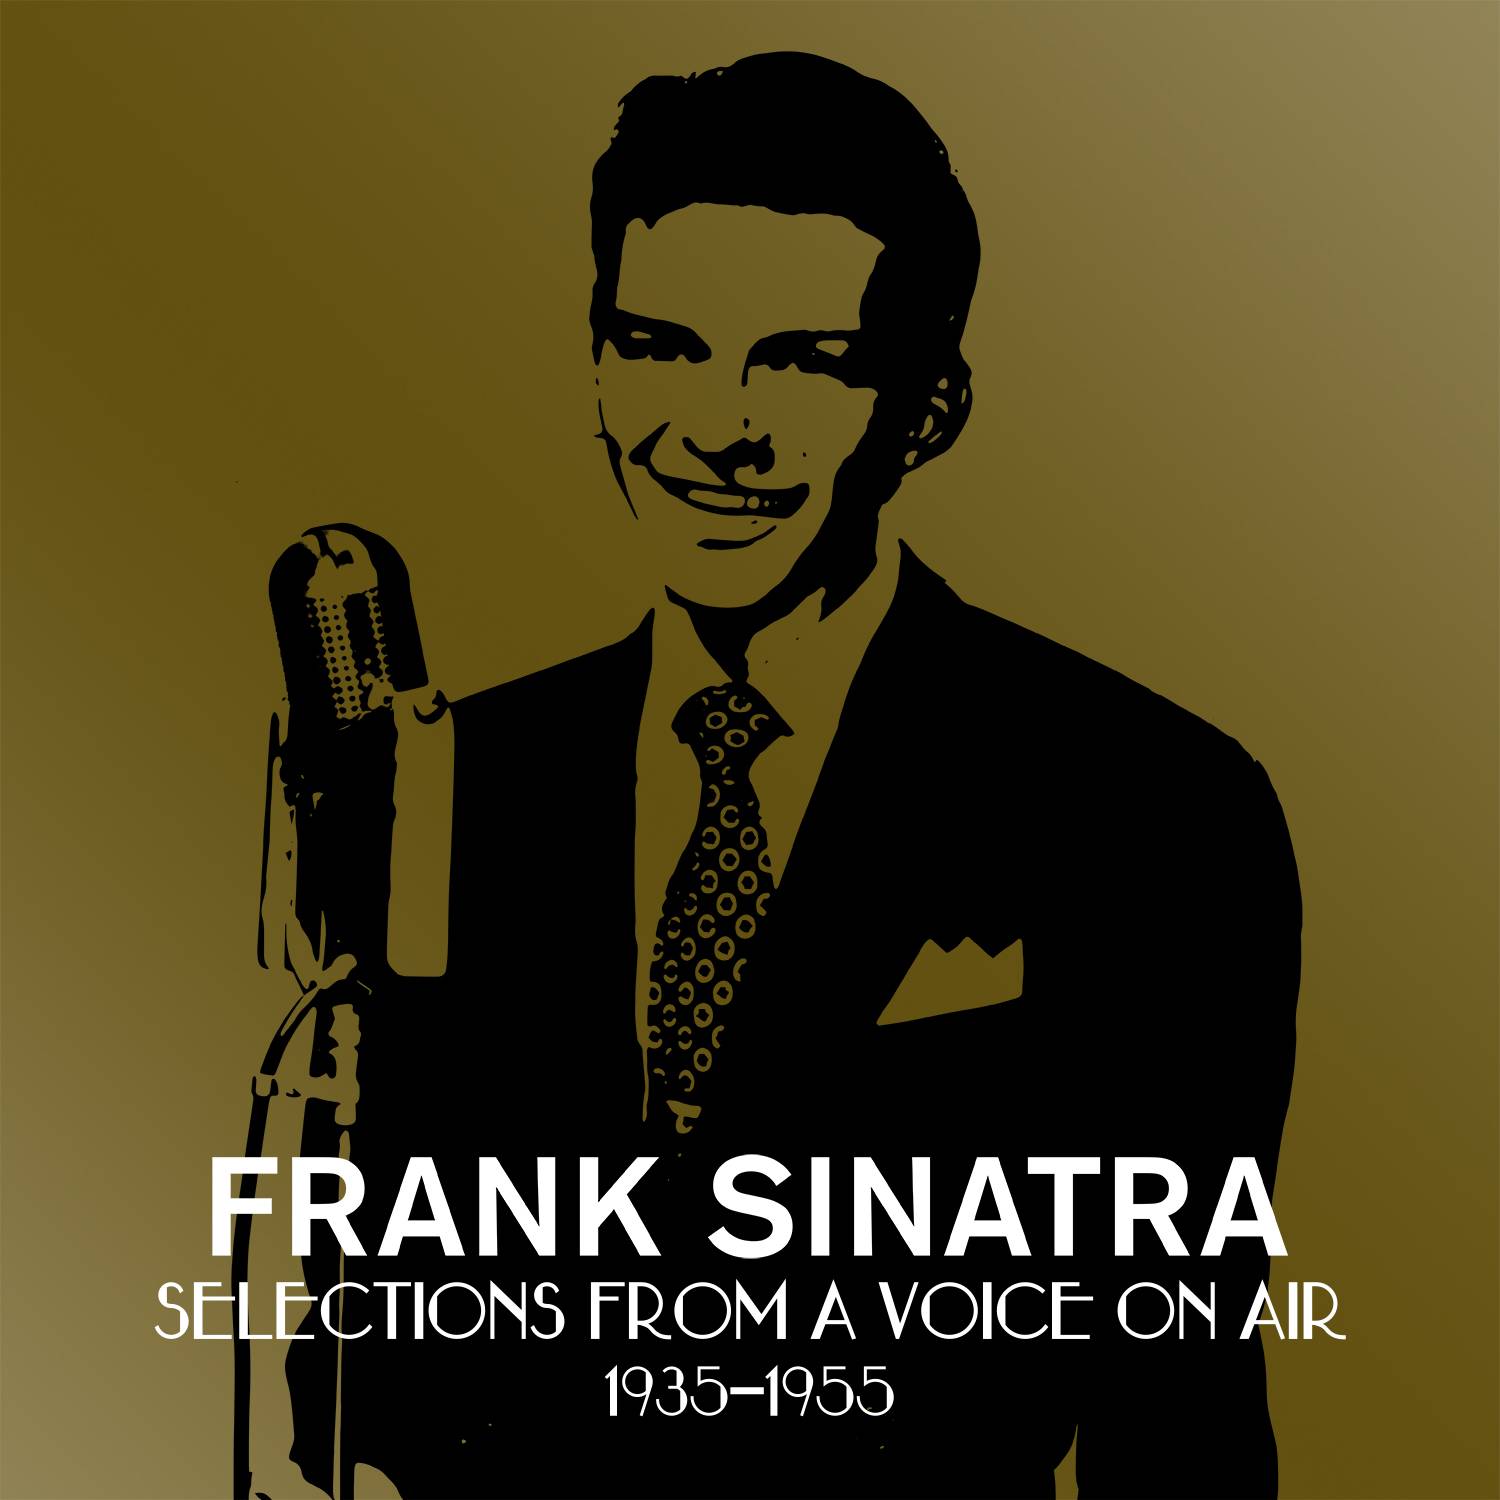 Frank Sinatra Introduction to "Home on the Range" / Home on the Range